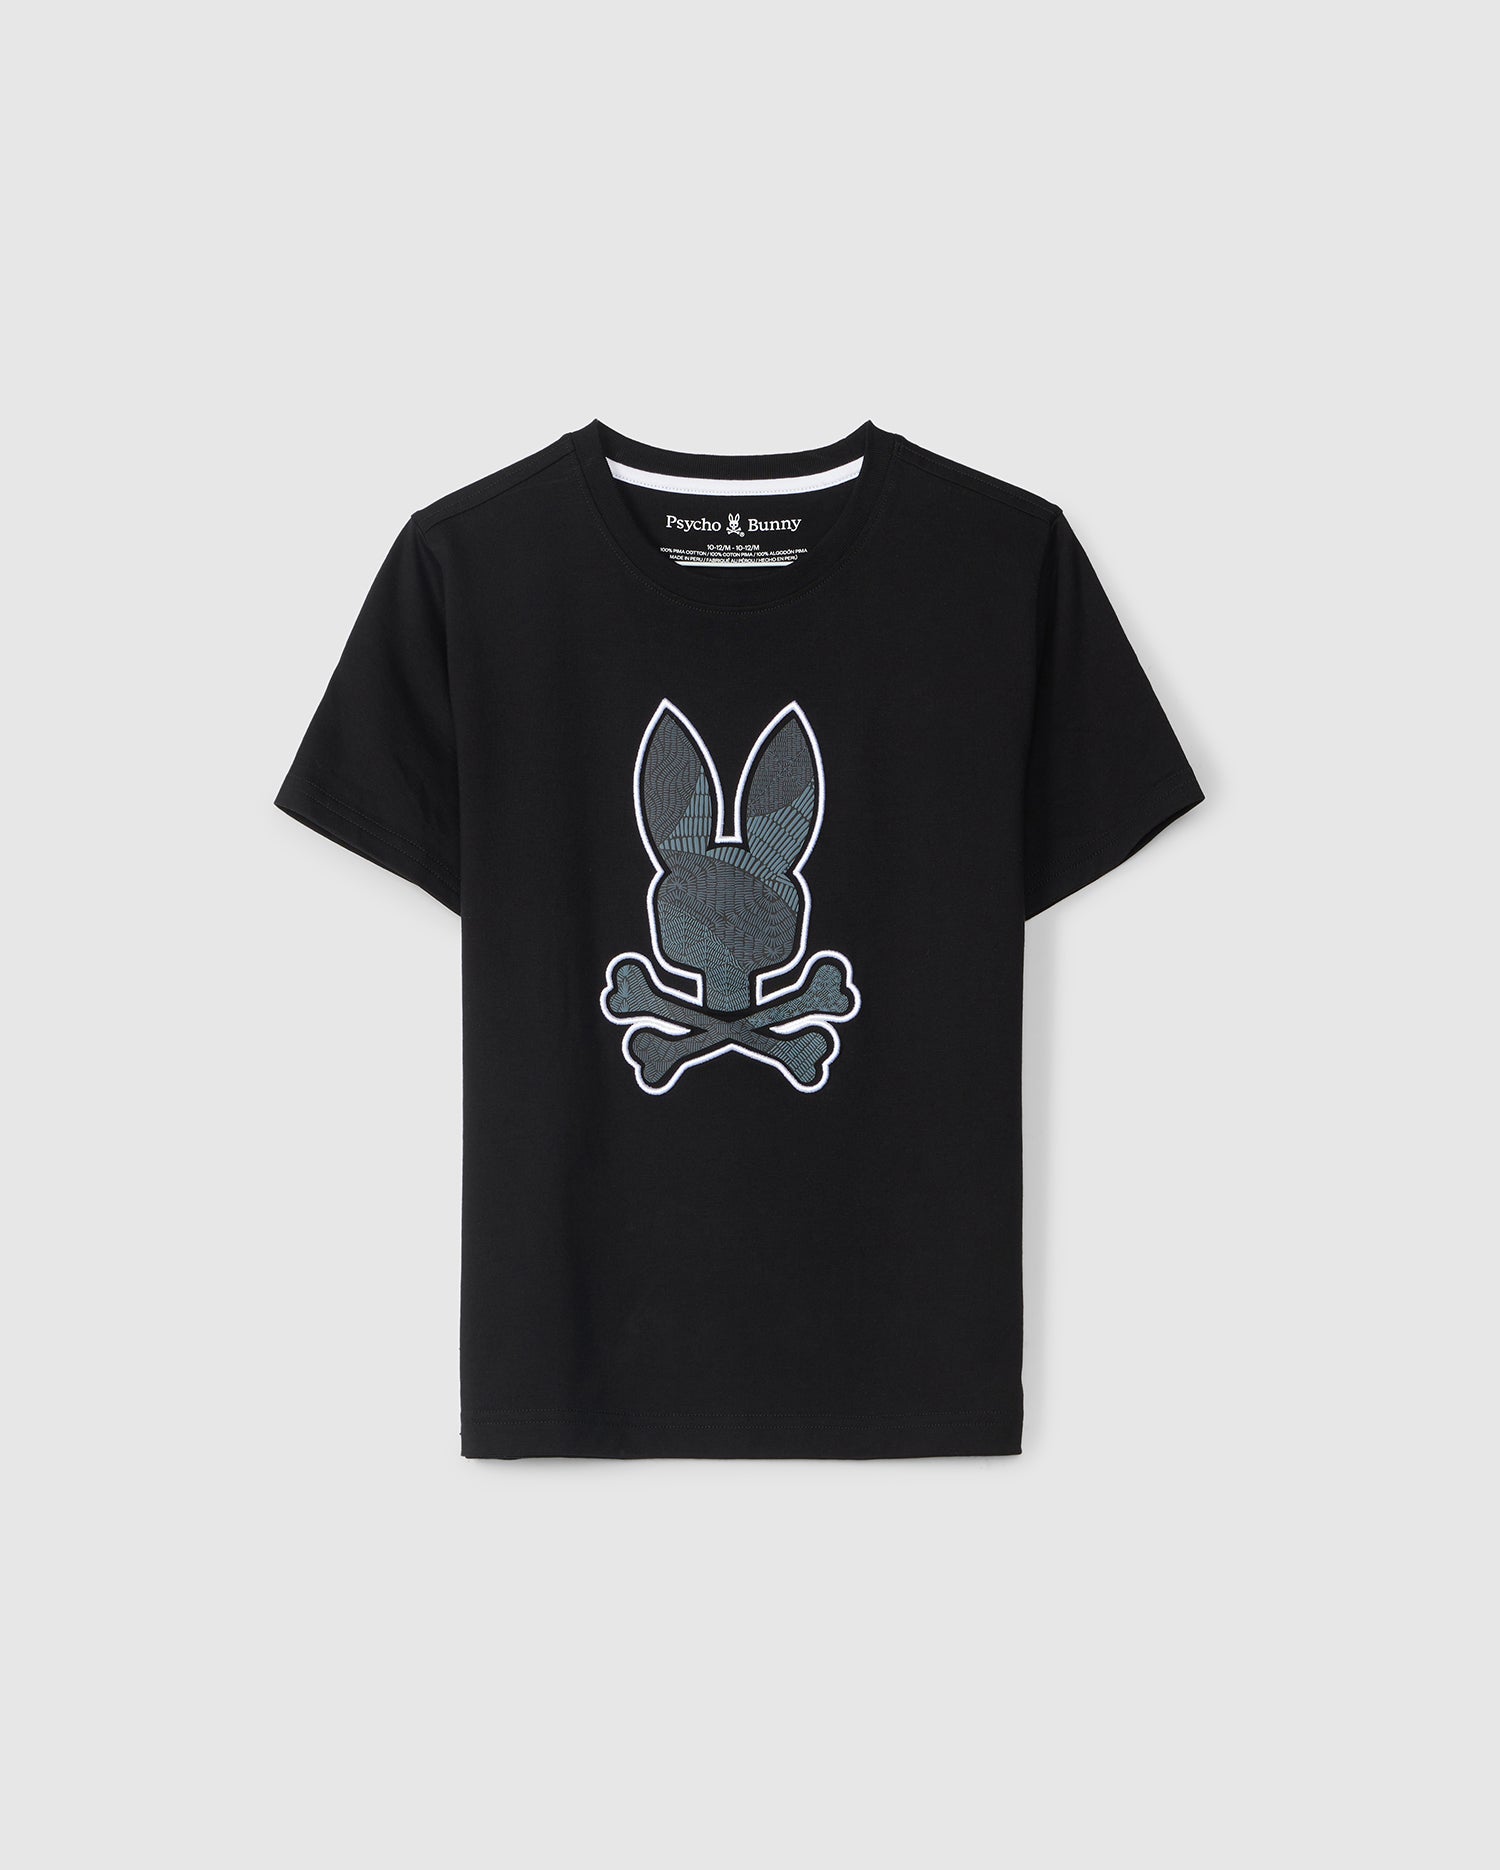 A black short-sleeve kids' graphic tee featuring a stylized outline of a rabbit's head with elongated ears situated above crossed bones on the front. The branding 